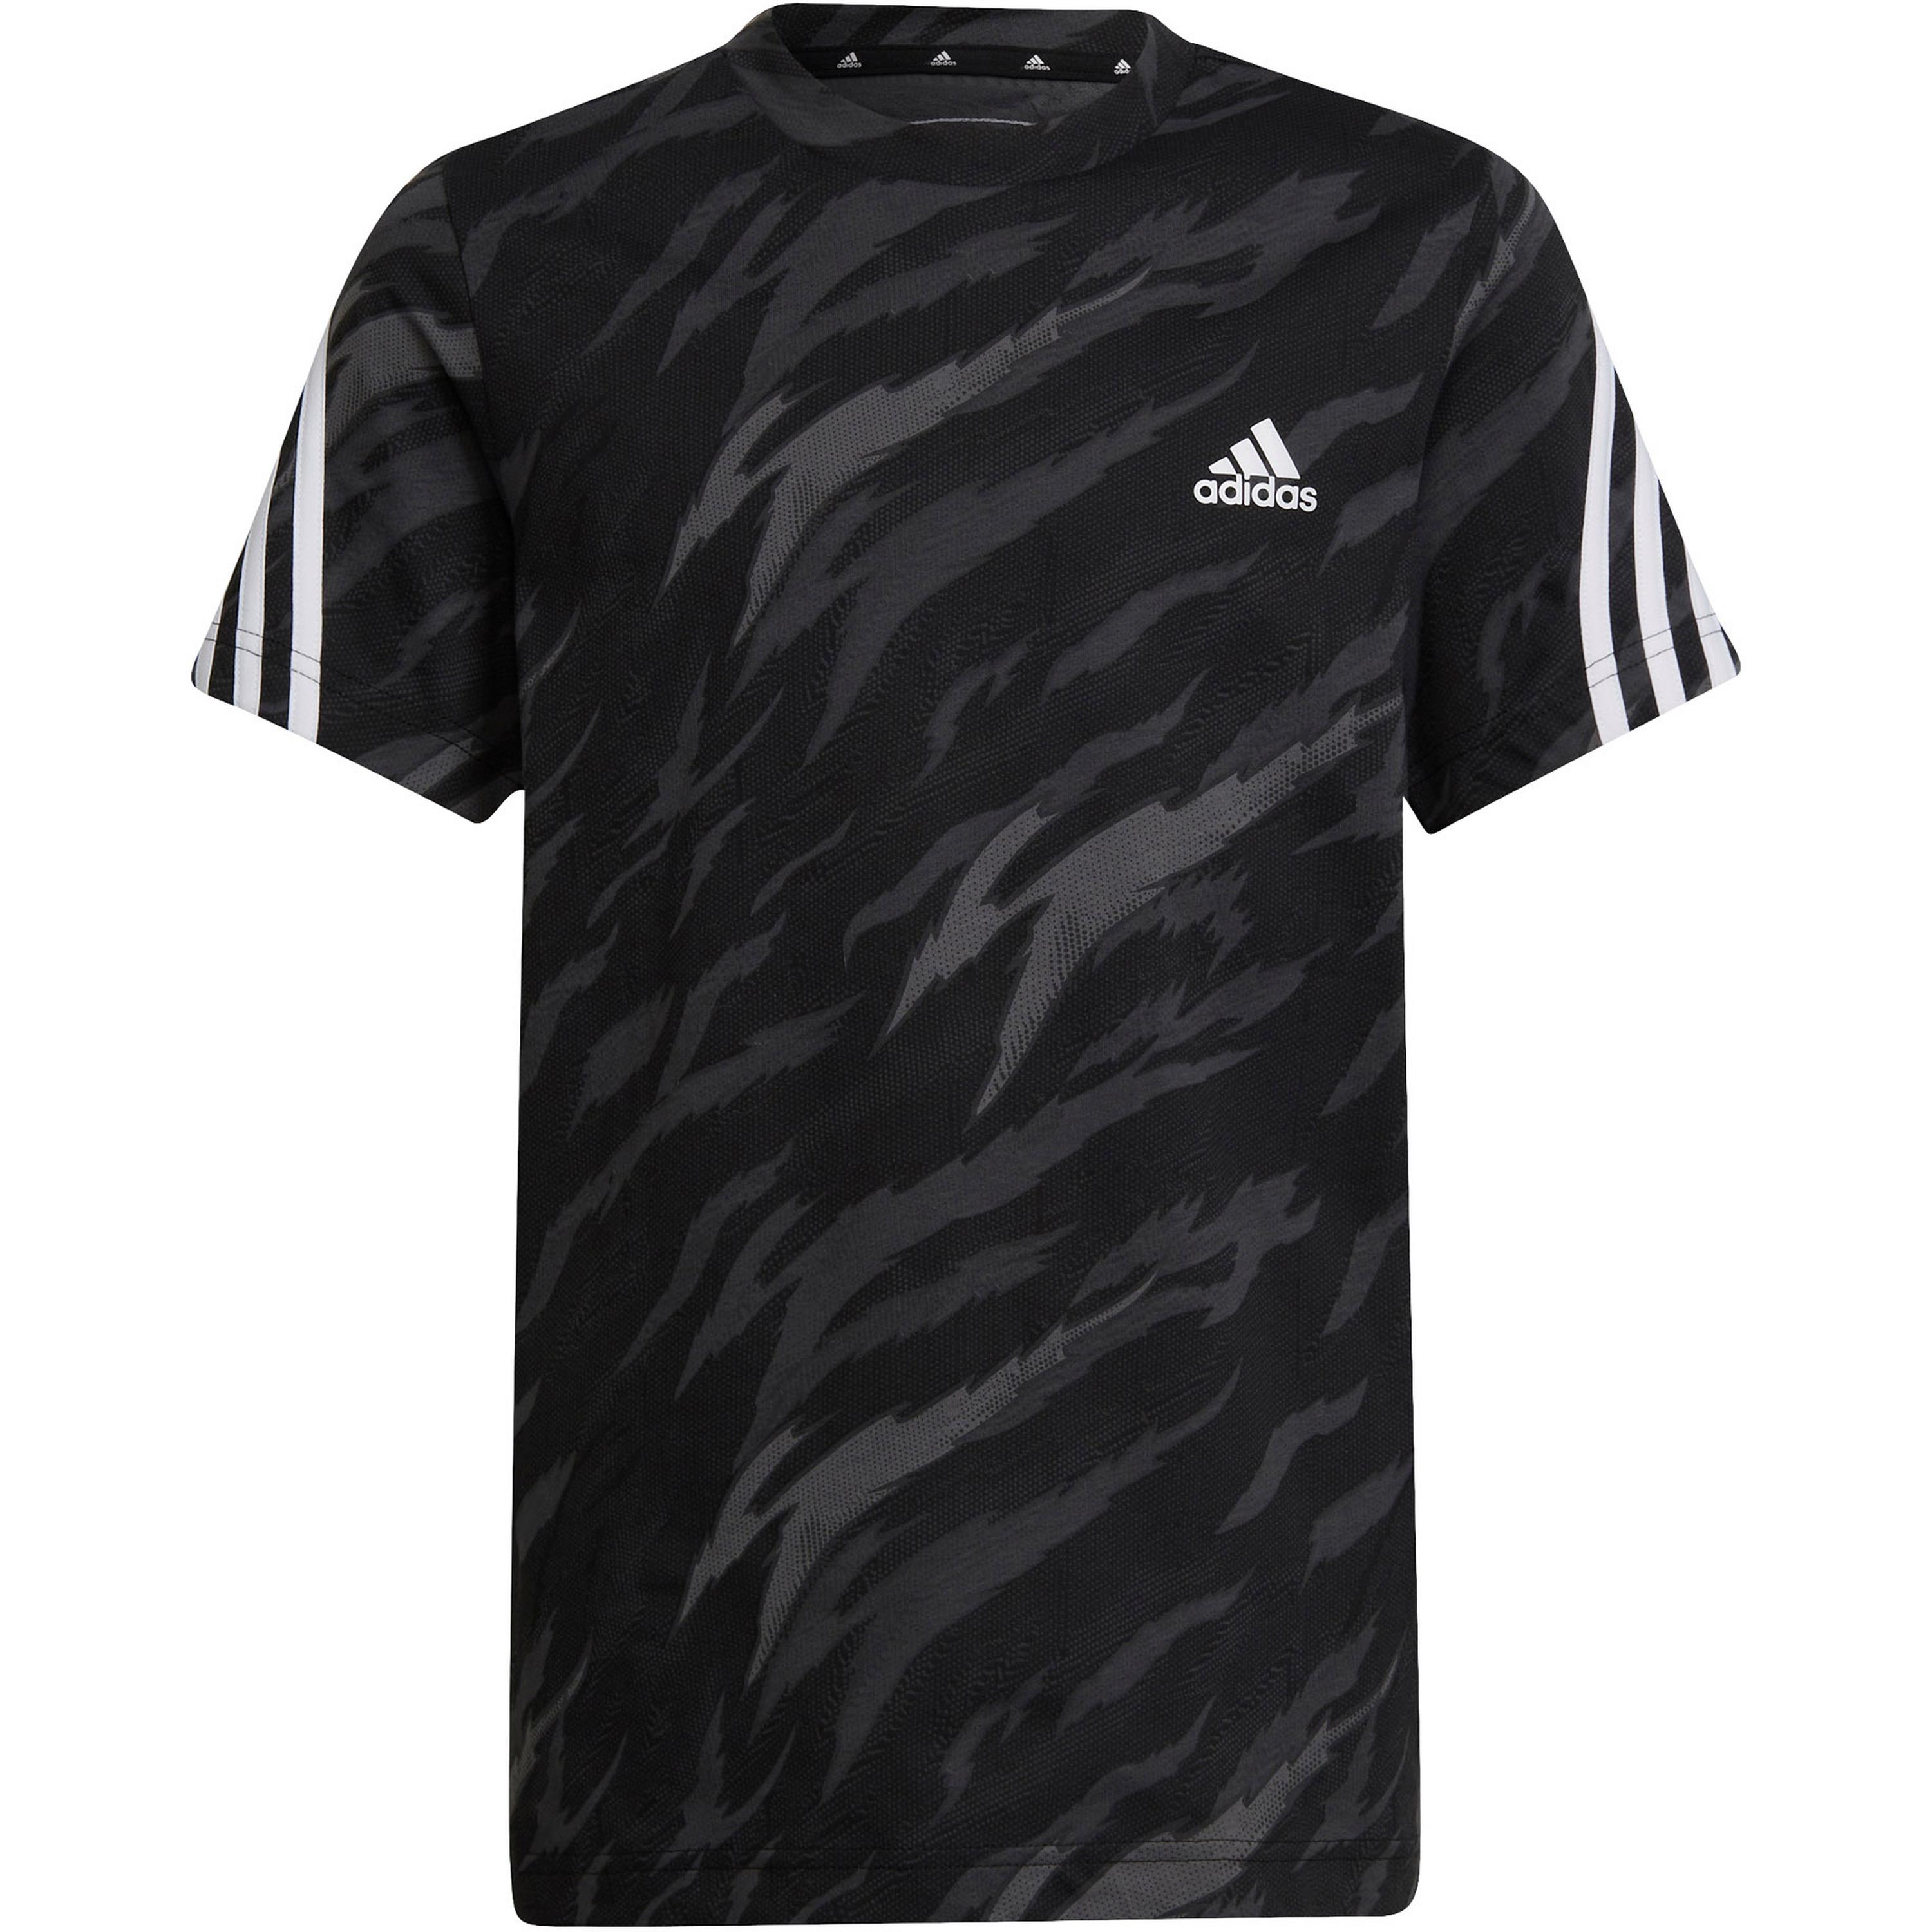 Image of adidas 3-STRIPES FUTURE ICONS T-Shirt Jungen